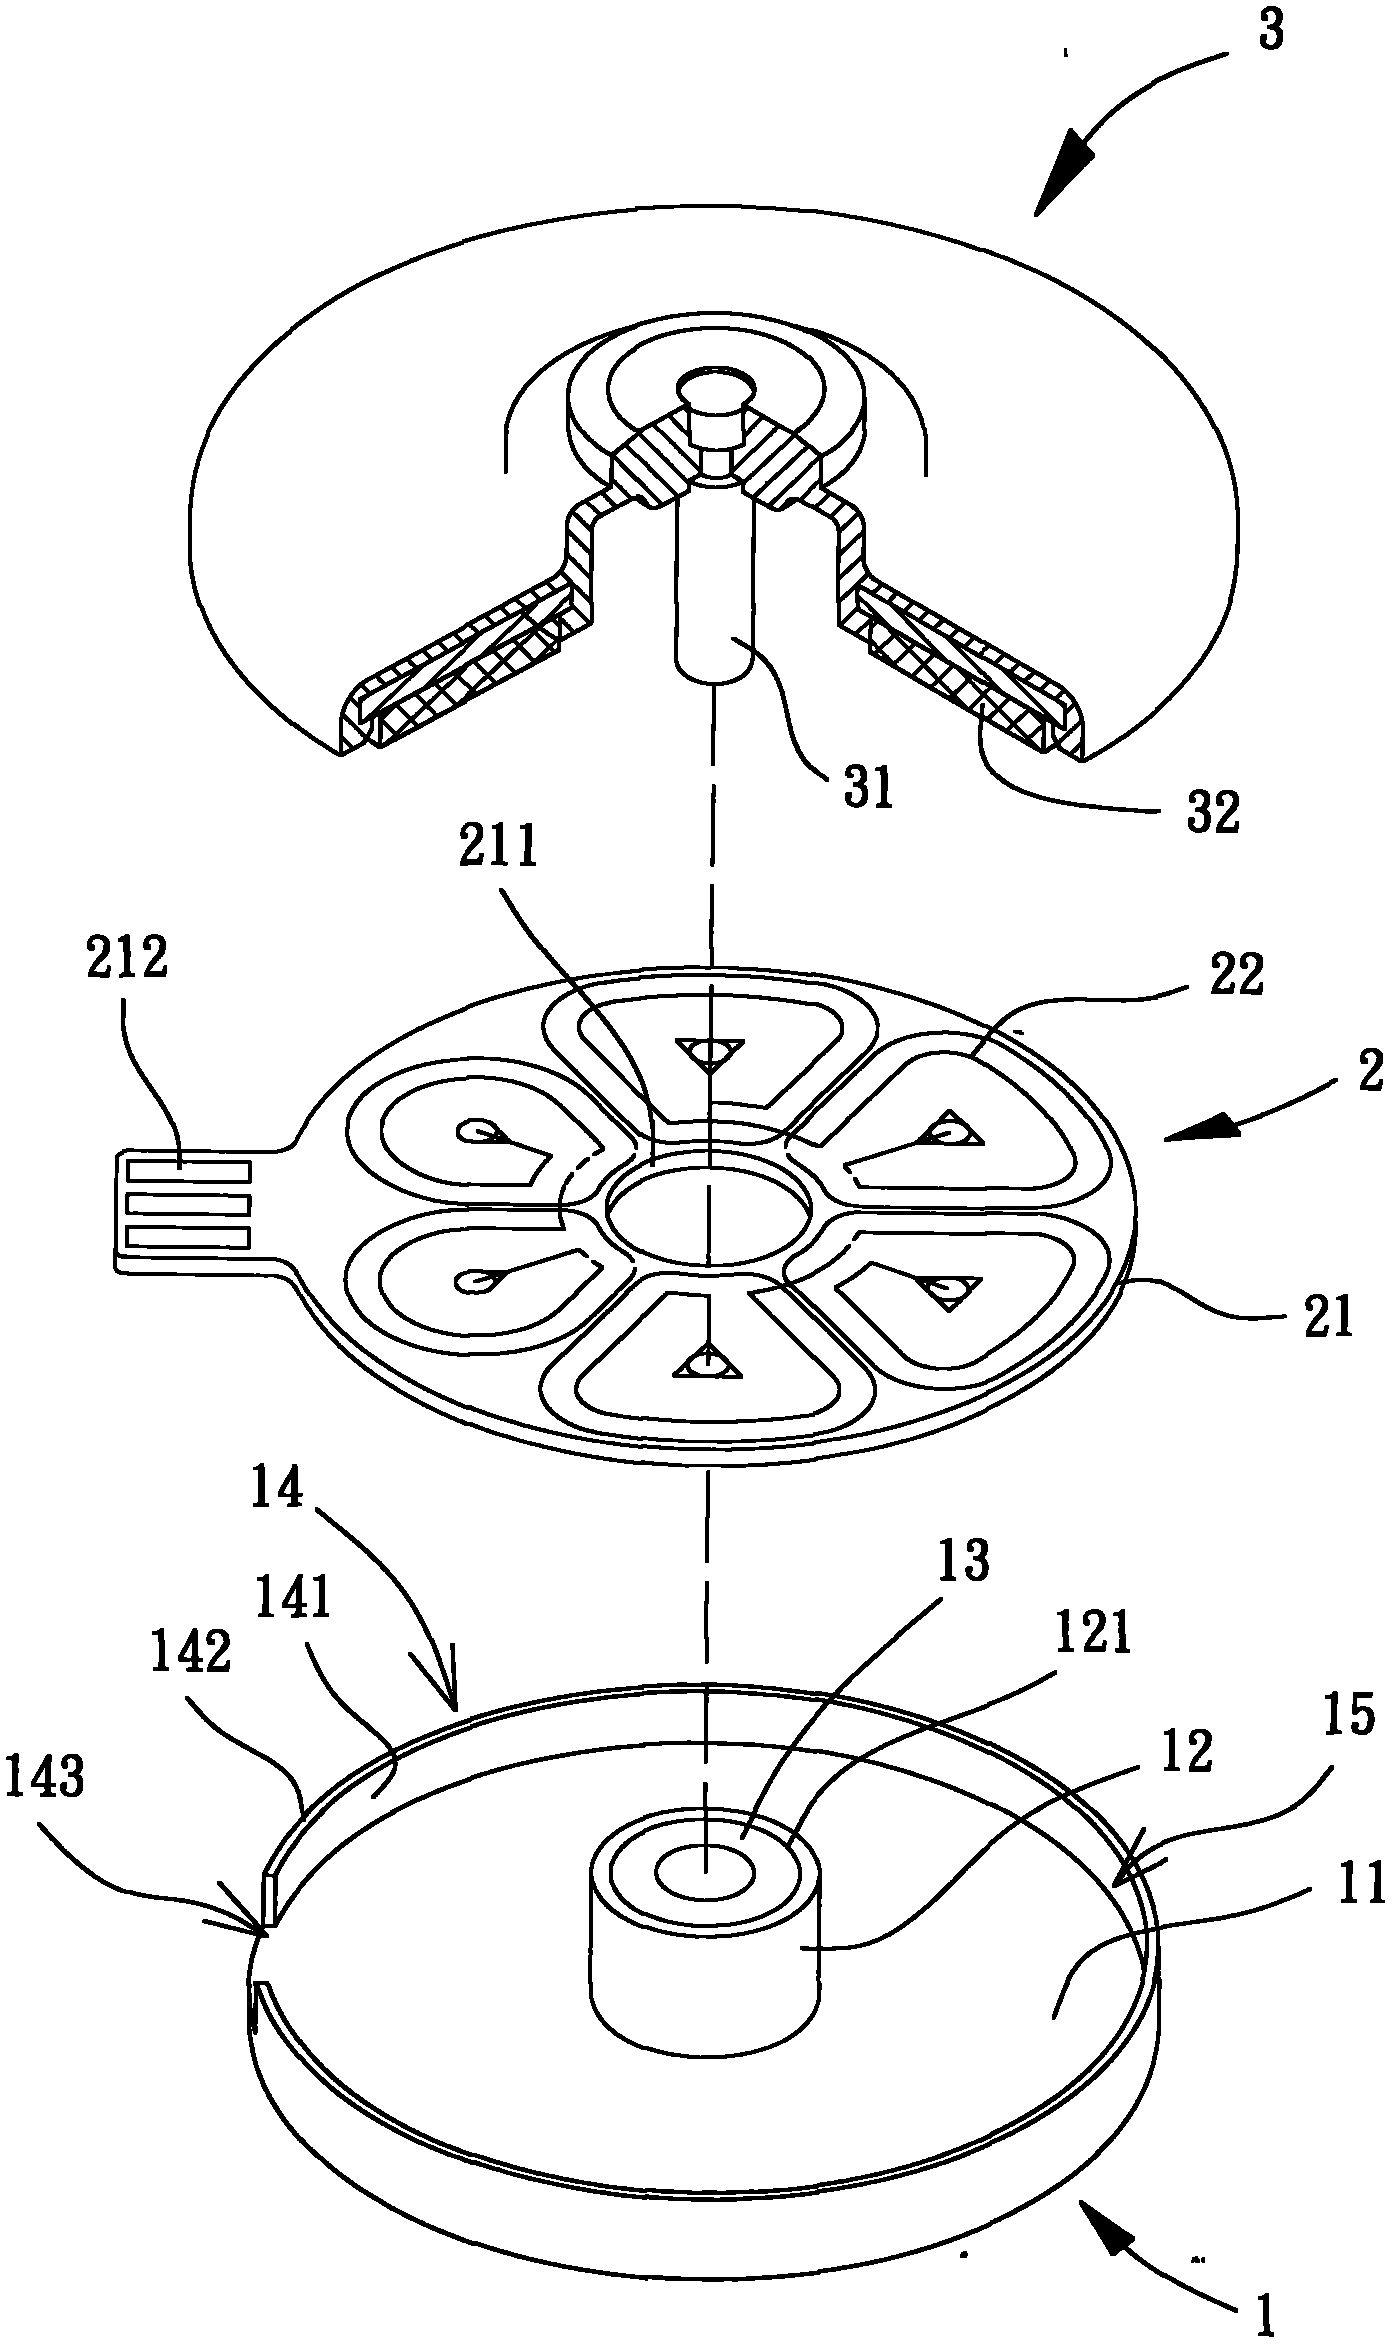 Miniature motor and cooling fan having the same